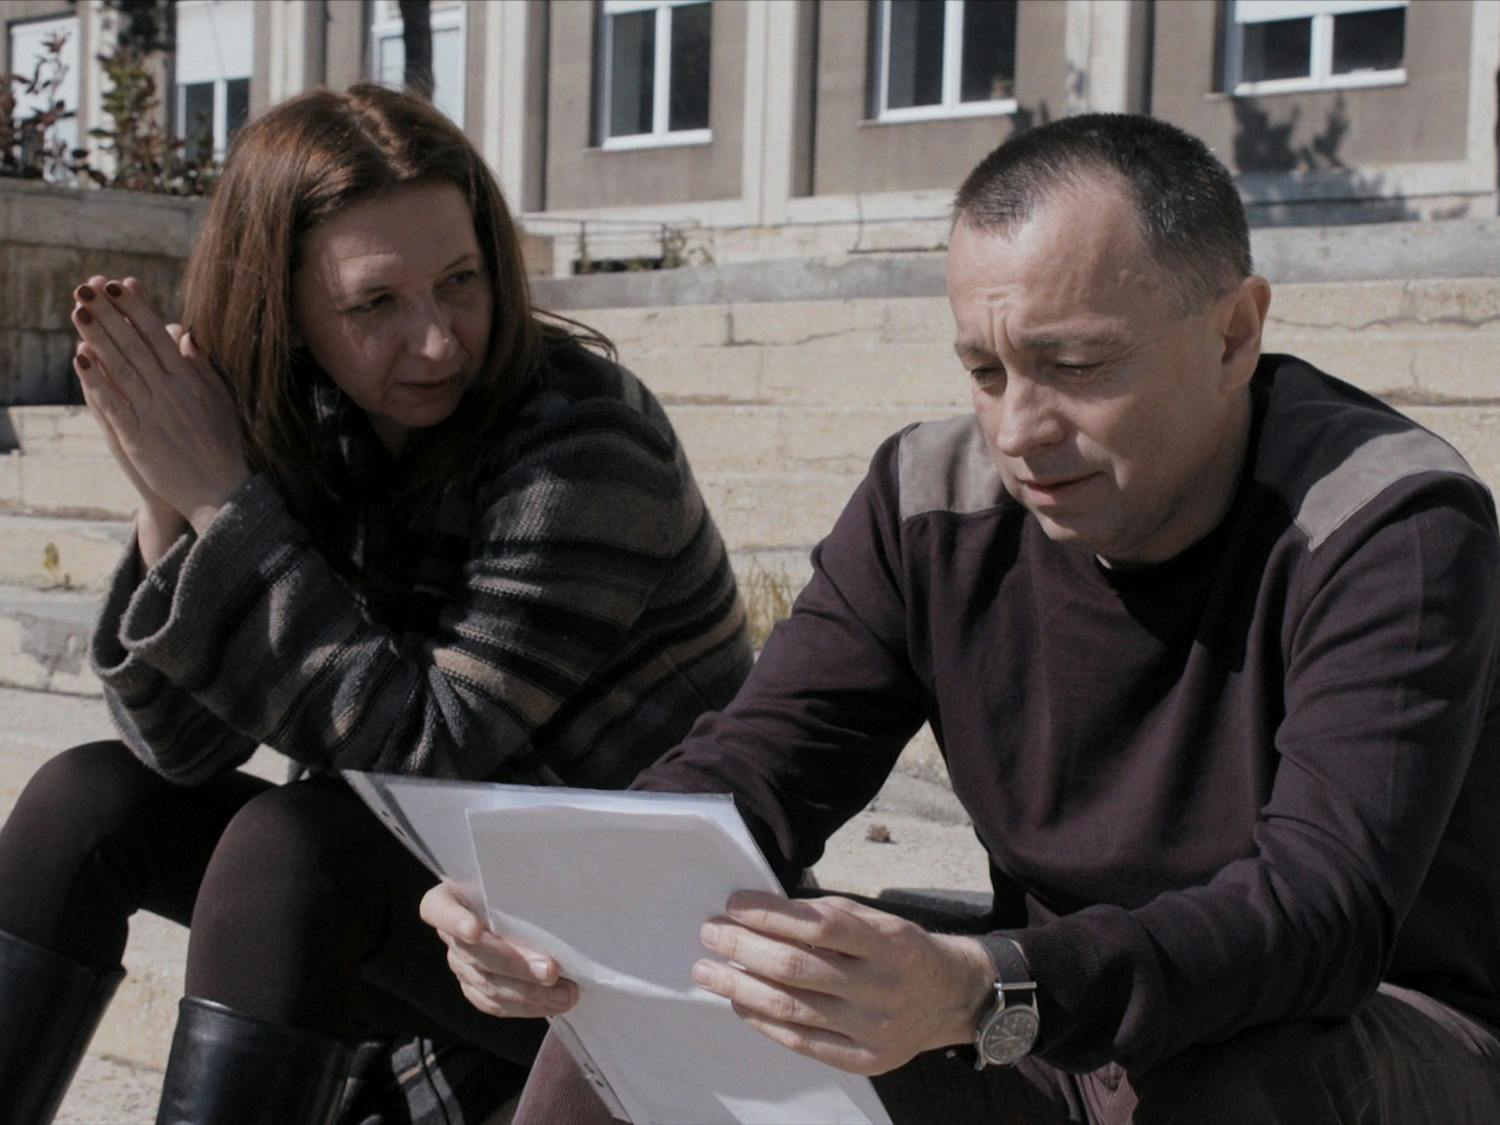 "Collective" tells the story of how a group of investigative journalists exposed rampant government corruption in Romanian healthcare. Photo courtesy of Magnolia Pictures/TNS.